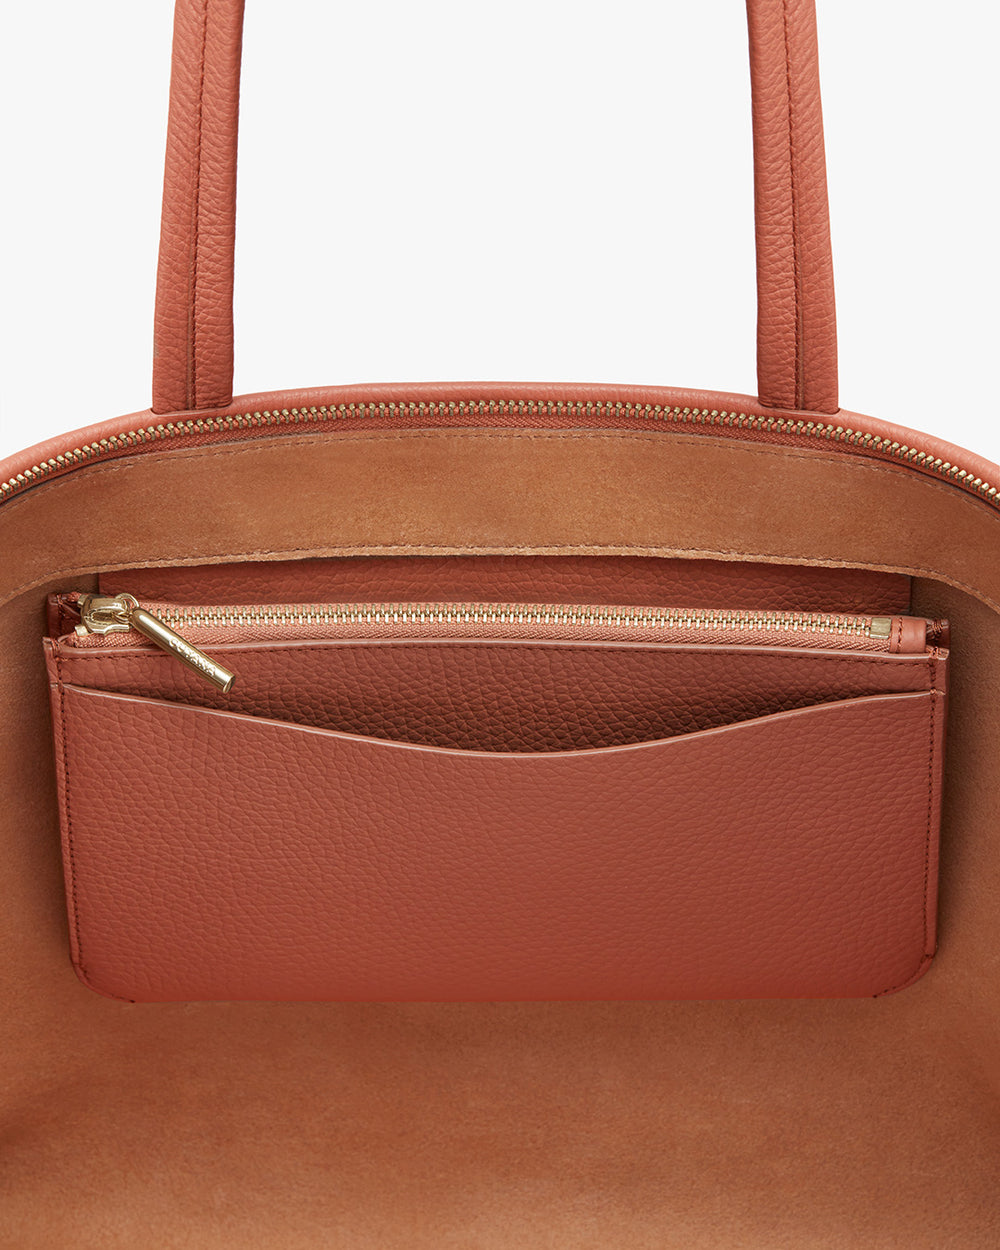 Handbag with top zipper and an outer pocket.